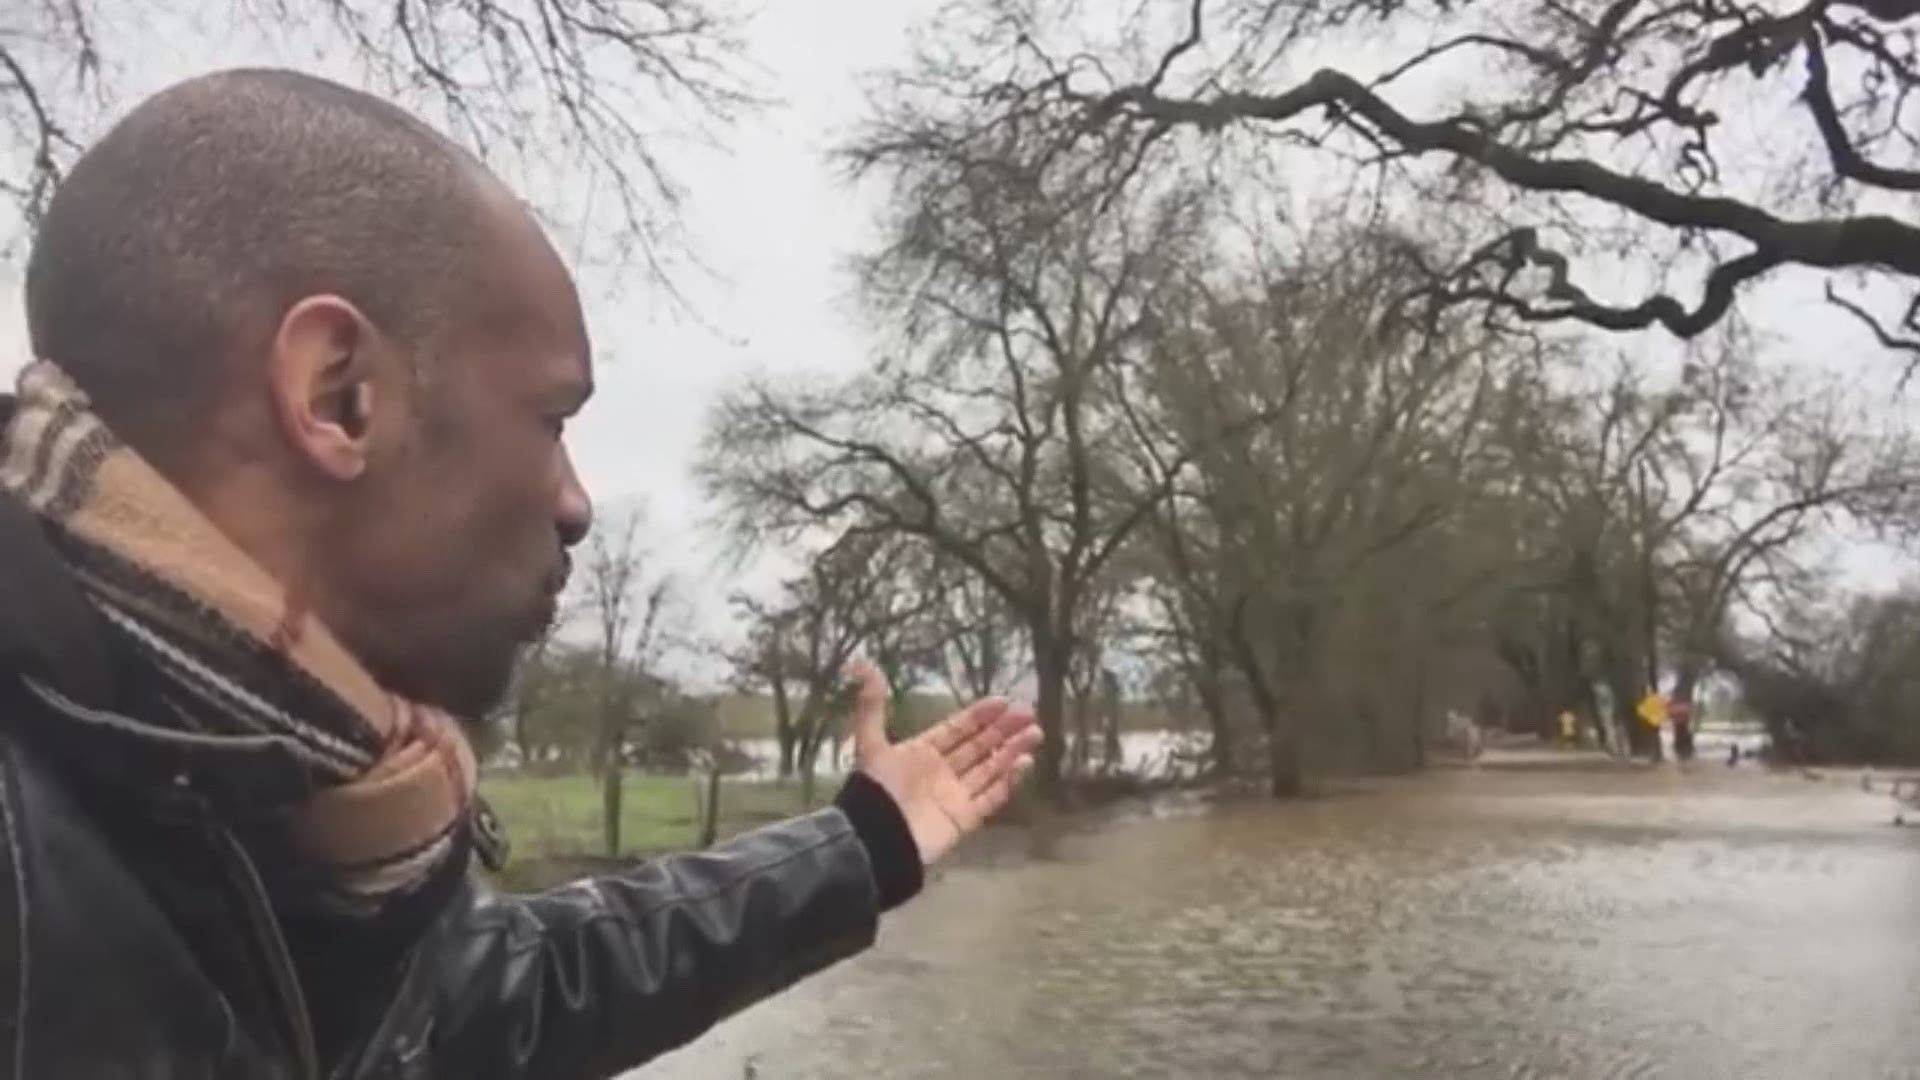 ABC10 Reporter Kevin John was in Sloughhouse Thursday, where crews were called to pull a car out of floodwaters.  With the second of two heavy storms still coursing through Northern California, travelers are encouraged to check conditions before hitting the road.